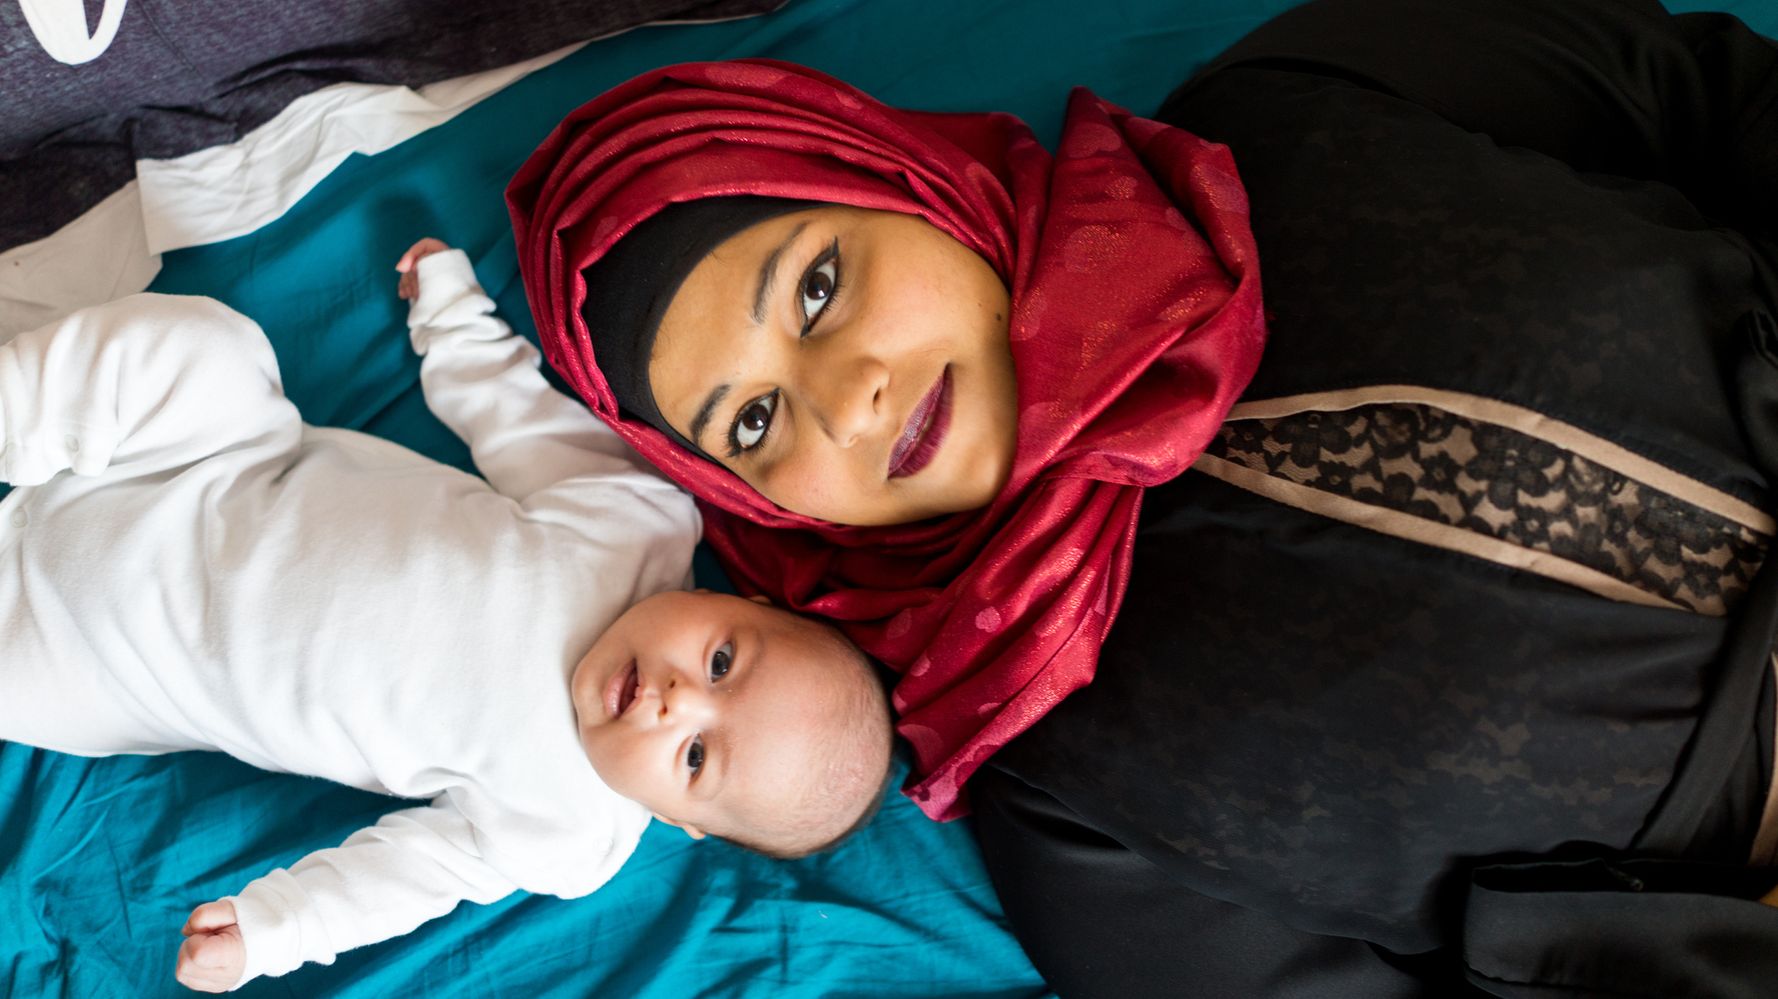 Muslim Women Even Face Discrimination During Labour And Pregnancy